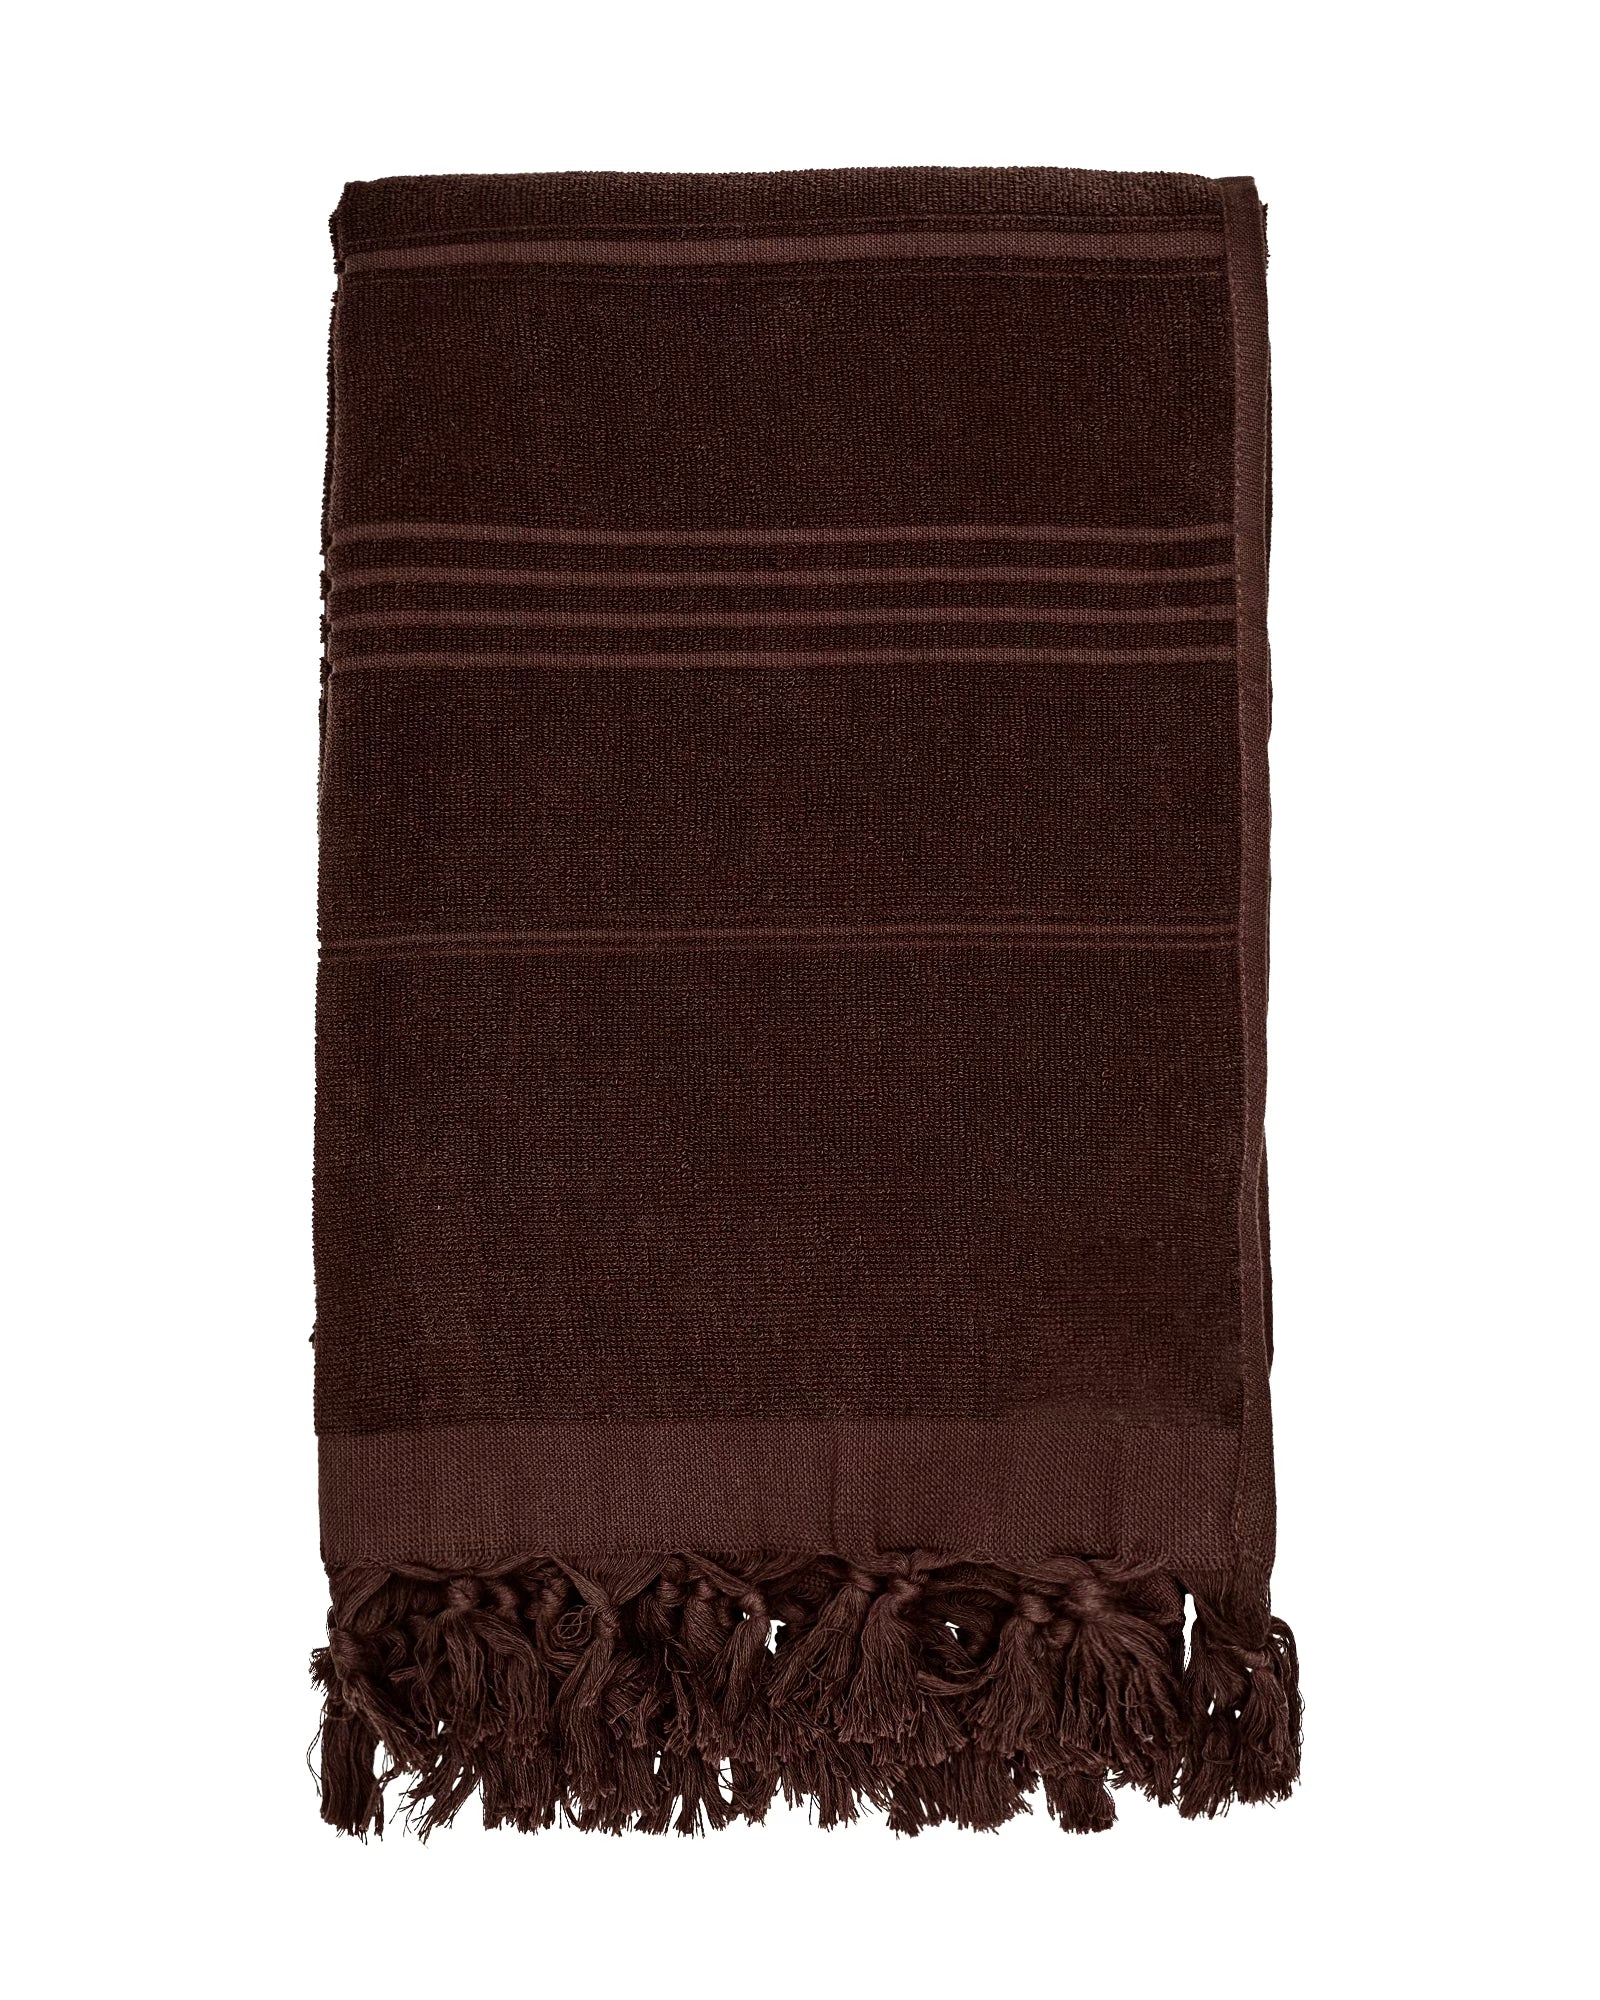 THE TERRY TOWEL - COCAO